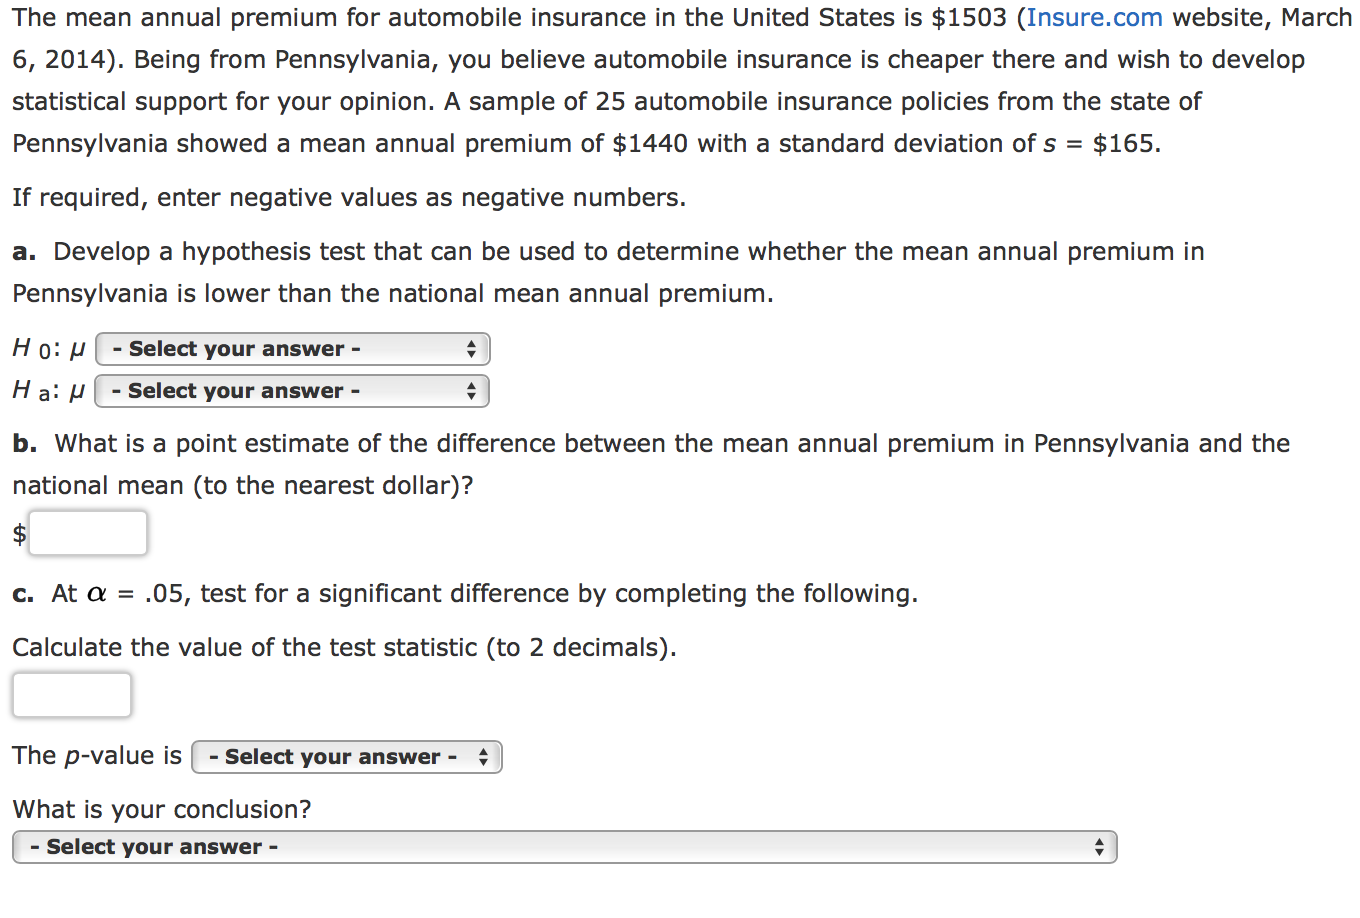 The mean annual premium for automobile insurance in the United States is $1503 (Insure.com website, March
6, 2014). Being from Pennsylvania, you believe automobile insurance is cheaper there and wish to develop
statistical support for your opinion. A sample of 25 automobile insurance policies from the state of
$165
Pennsylvania showed a mean annual premium of $1440 with a standard deviation of s =
If required, enter negative values as negative numbers.
a. Develop a hypothesis test that can be used to determine whether the mean annual premium in
Pennsylvania is lower than the national mean annual premium.
Но: и
Select your answer -
H a P
- Select your answer -
b. What is a point estimate of the difference between the mean annual premium in Pennsylvania and the
national mean (to the nearest dollar)?
.05, test for a significant difference by completing the following.
c. At a
Calculate the value of the test statistic (to 2 decimals)
The p-value is
- Select your answer -
What is your conclusion?
- Select your answer -
